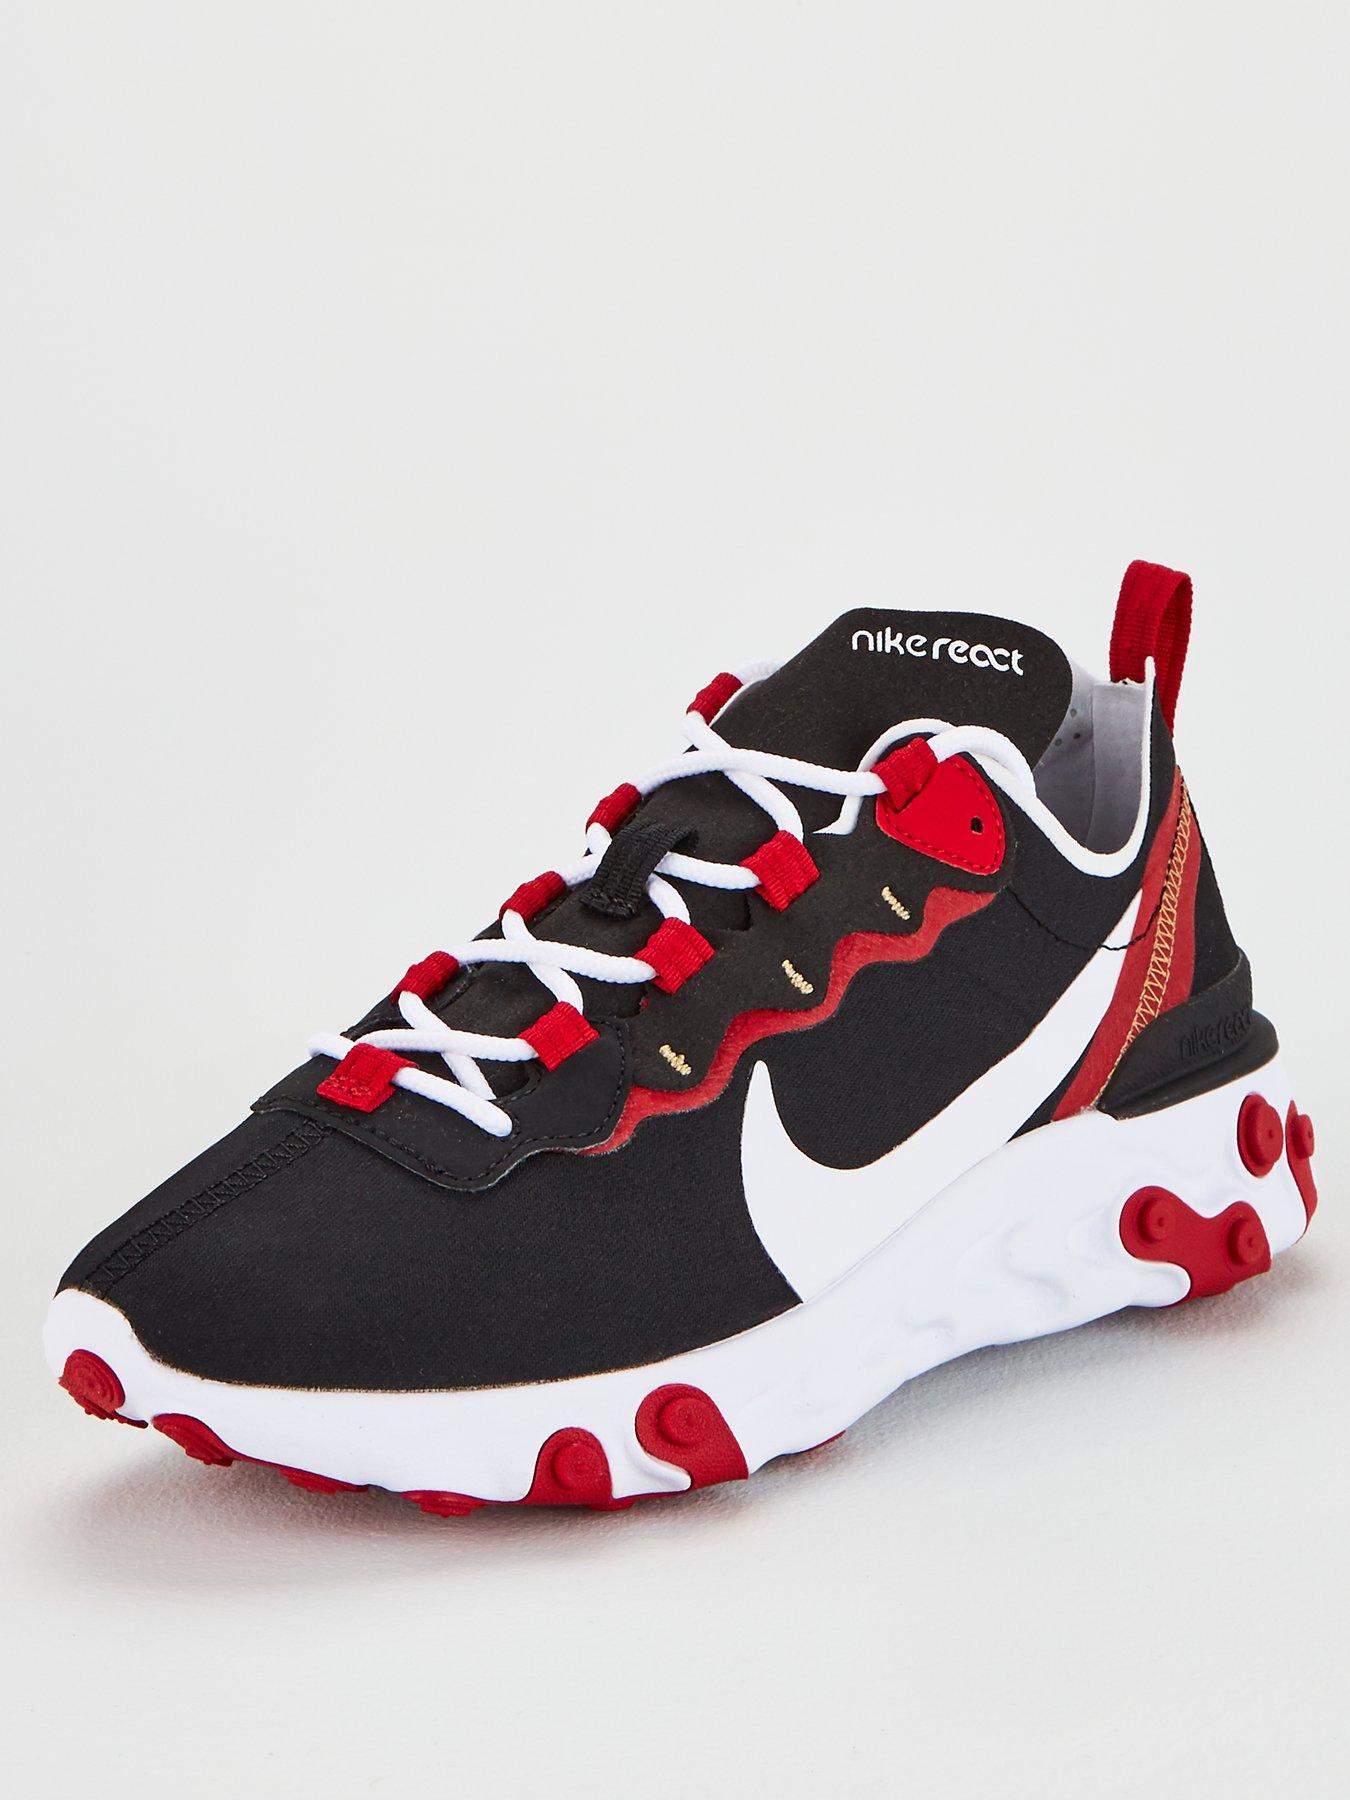 nike react black and red